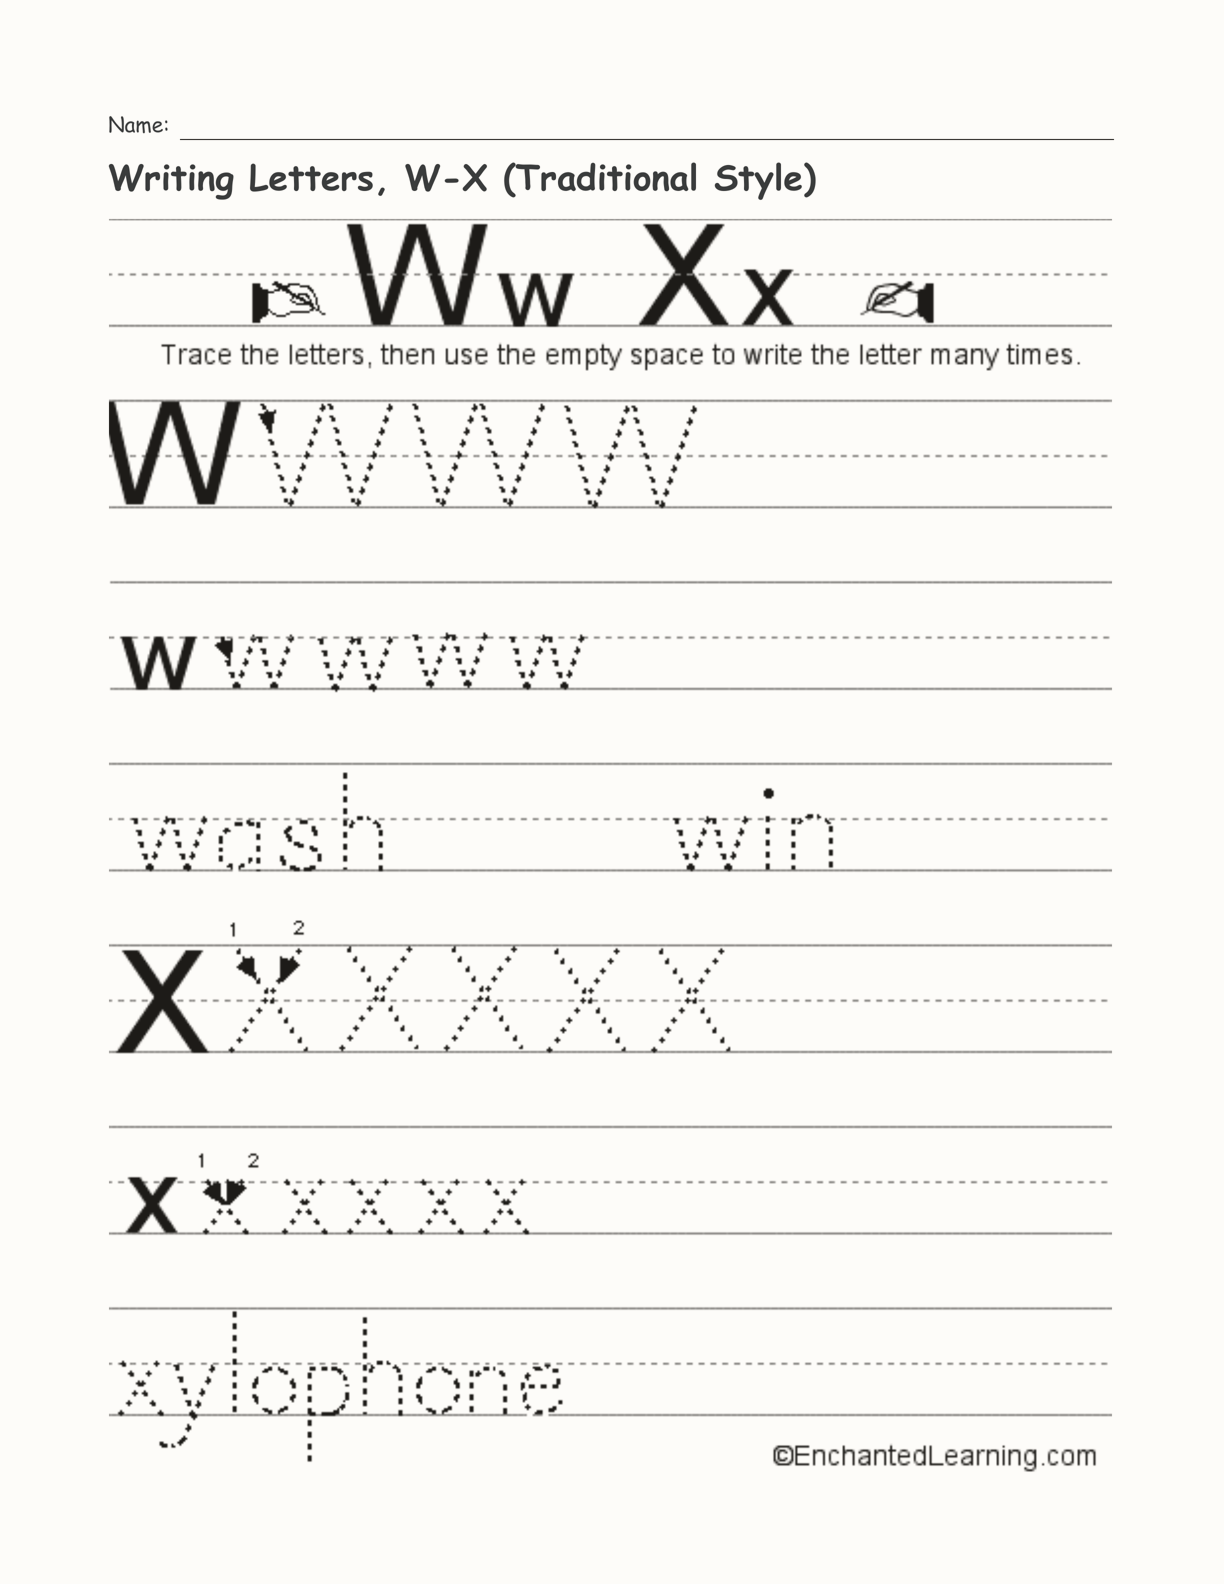 Writing Letters, W-X (Traditional Style) interactive worksheet page 1